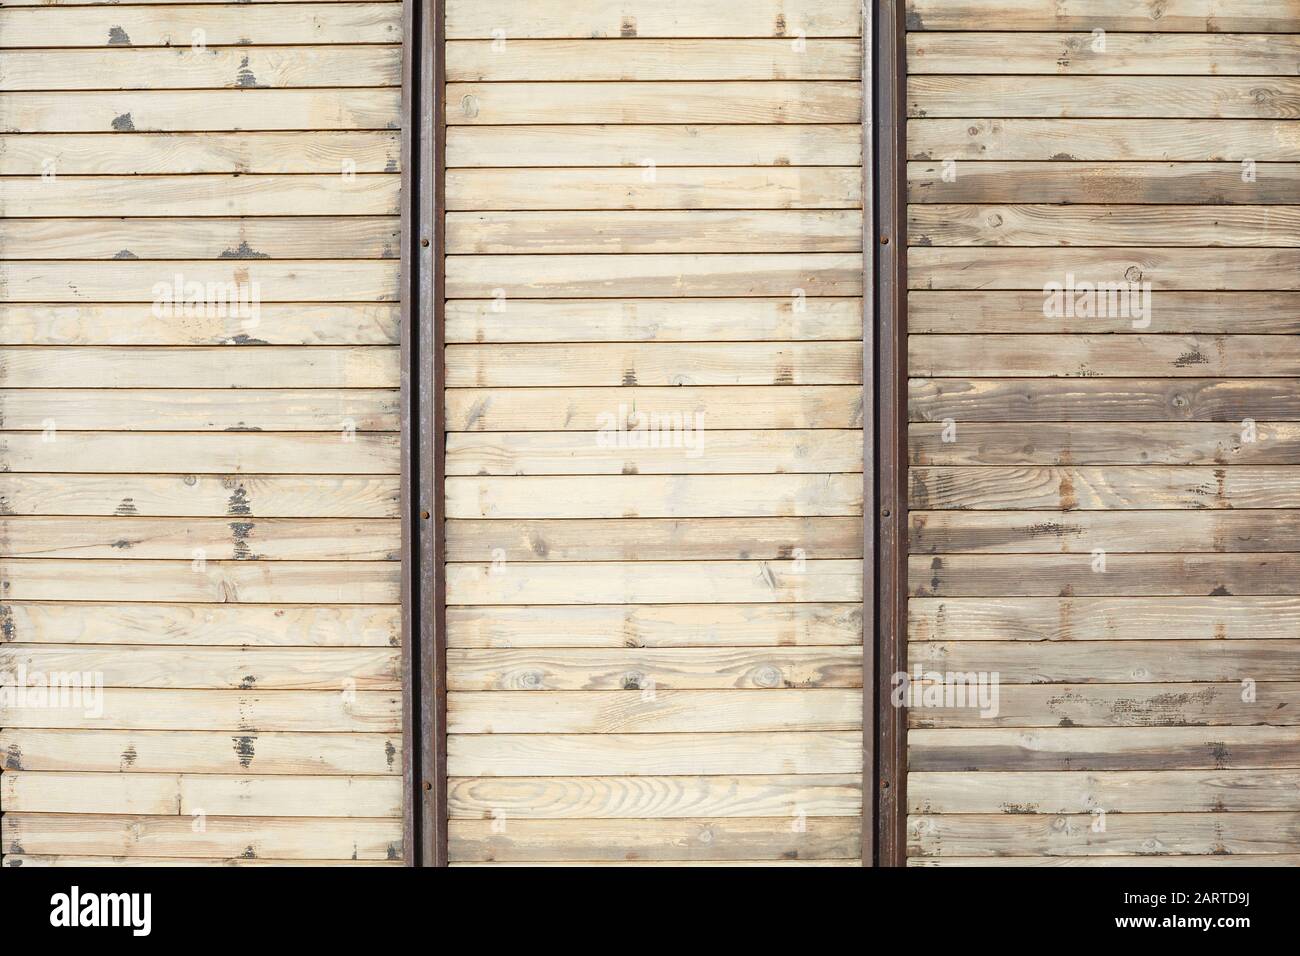 Wooden texture background with horizontal planks and vertical metal bars in sunlight Stock Photo